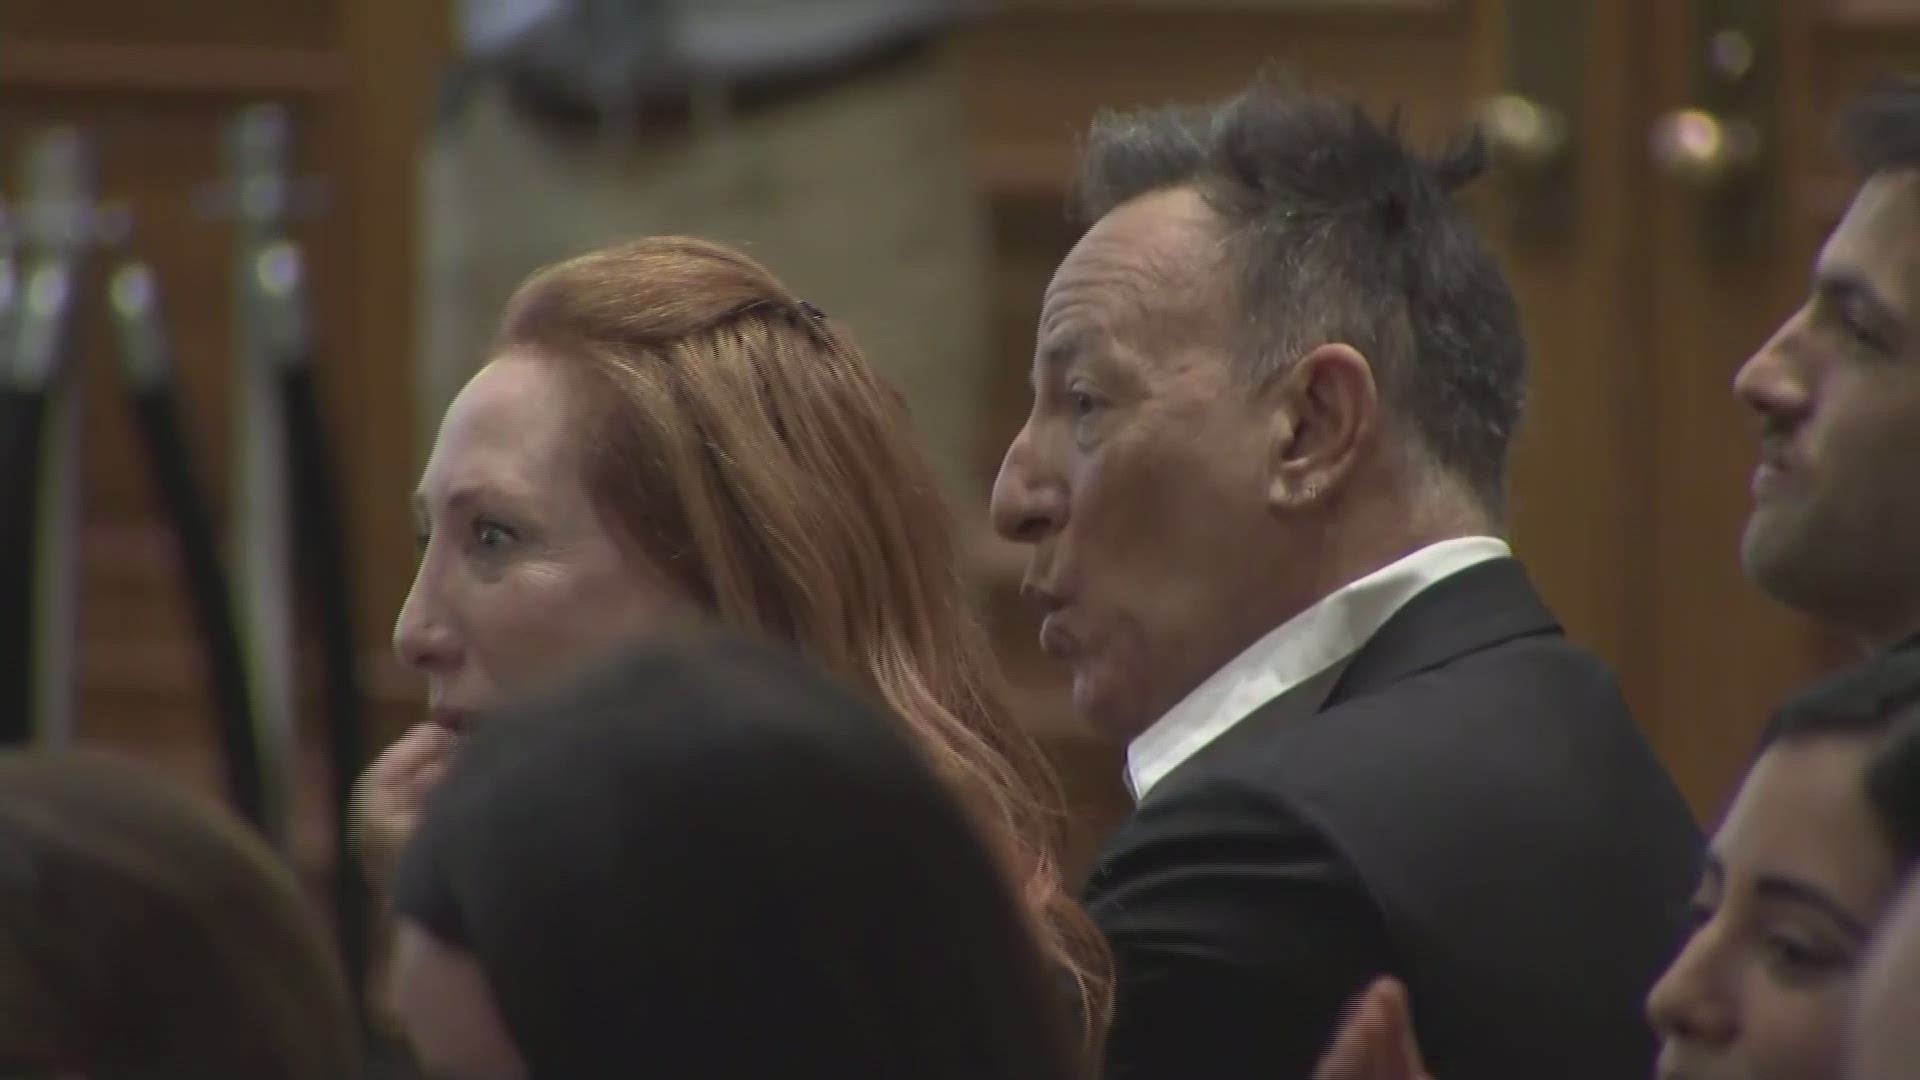 The youngest son of singer Bruce Springsteen was sworn in as a Jersey City firefighter.